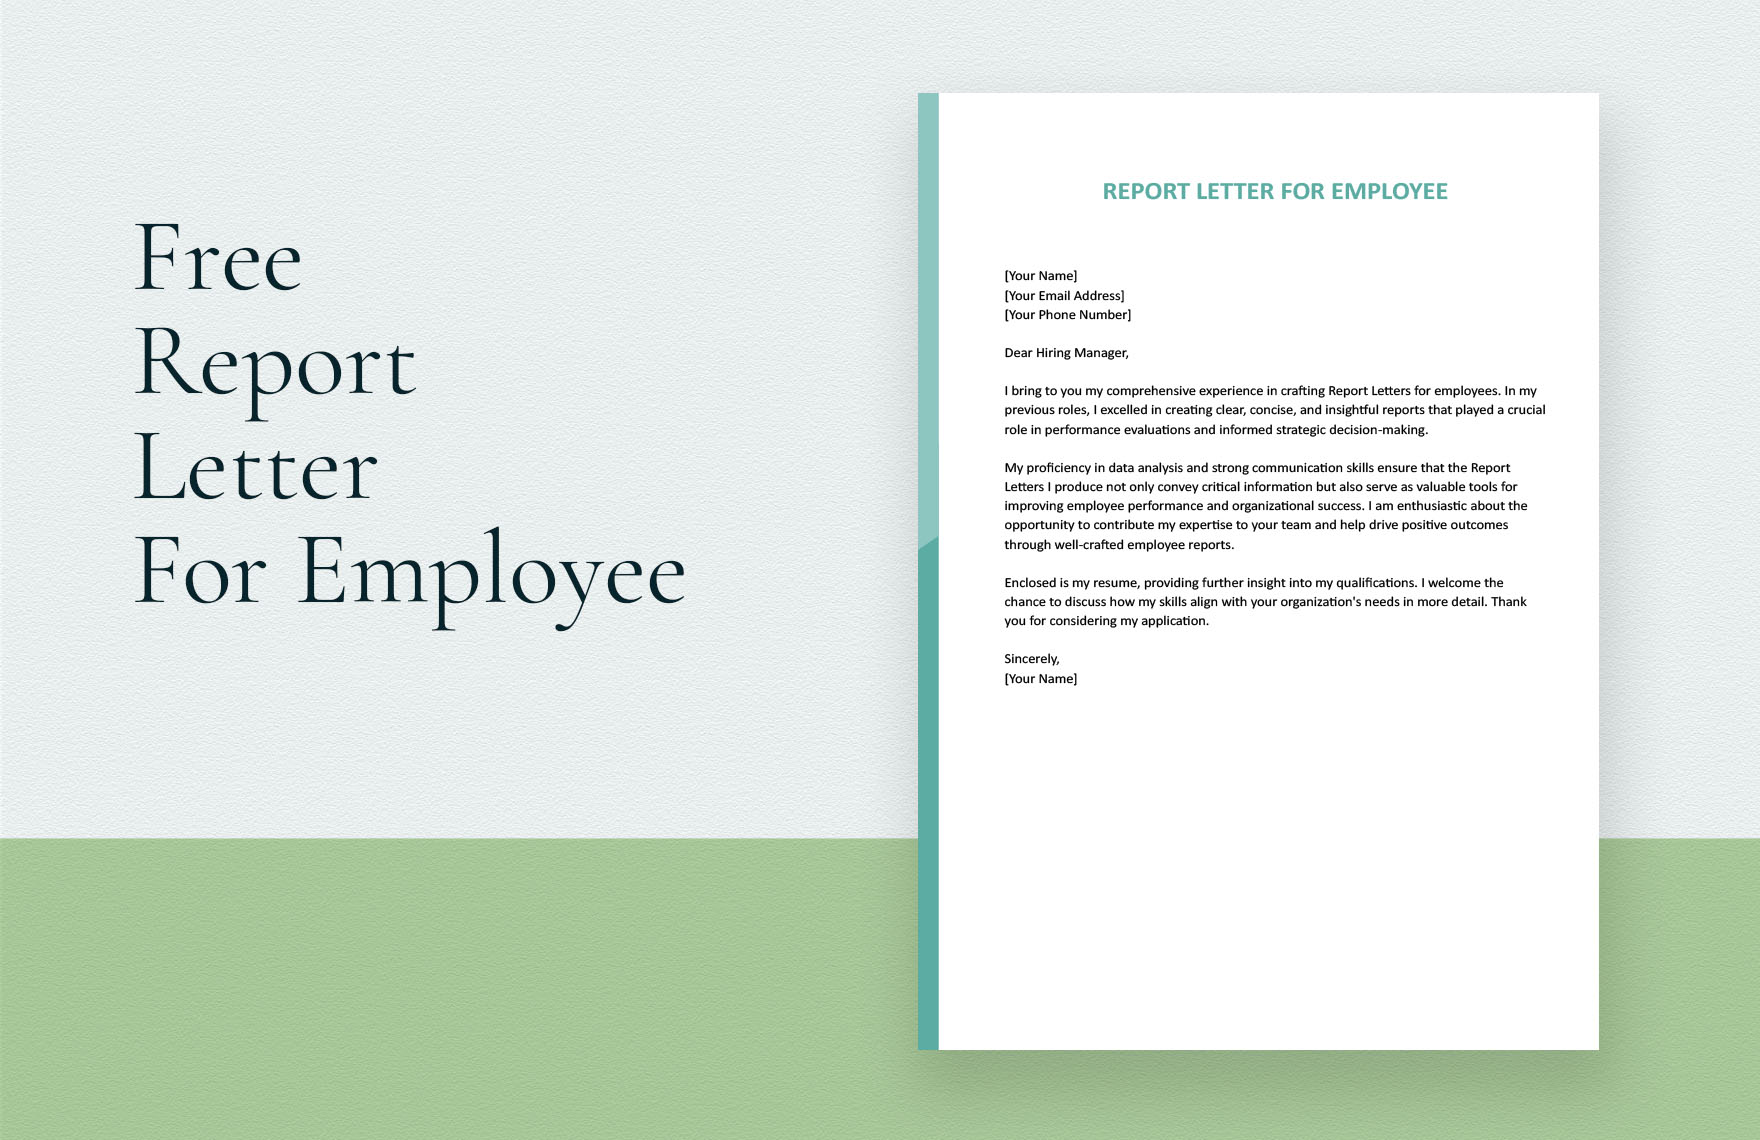 Report Letter For Employee